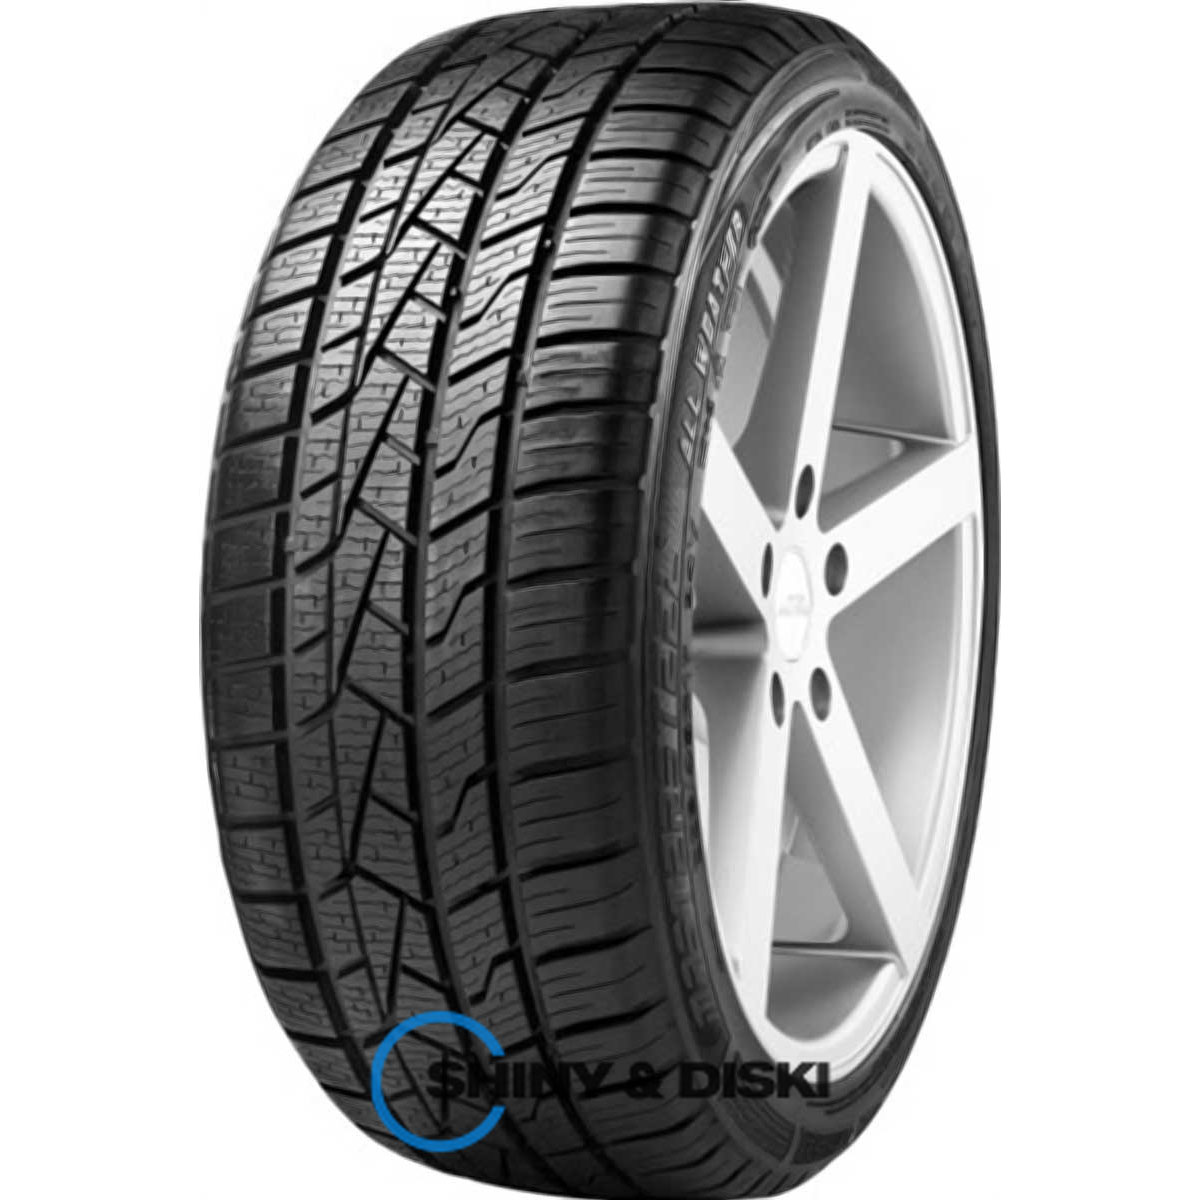 mastersteel all weather 215/45 r17 91w